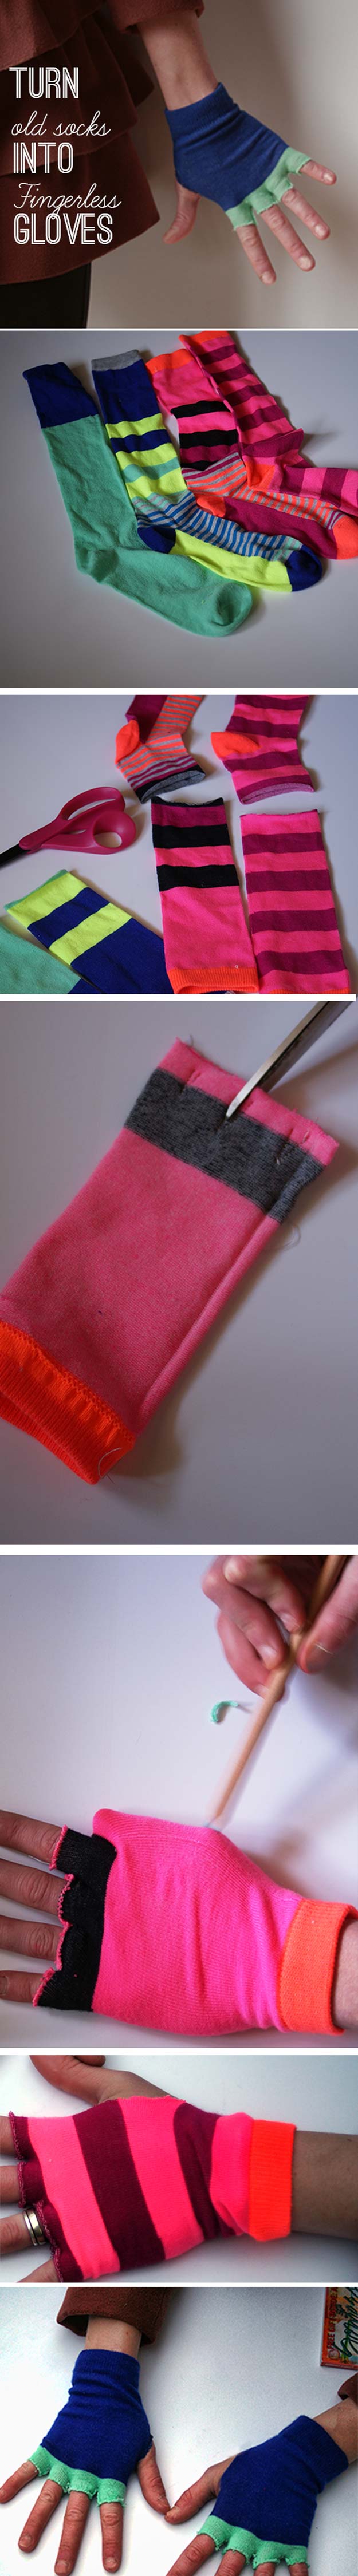 Cool Crafts Made With Old Socks - Old Socks to Fingerless Gloves - Fun DIY Projects and Gifts You Can Make With A Sock - Easy DIY Ideas for Teens, Teenagers, Kids and Adults - Step by Step Tutorials and Instructions for Making Room Decor, Animals, Cat, Rabbit, Owl, Puppets, Snowman, Gloves 